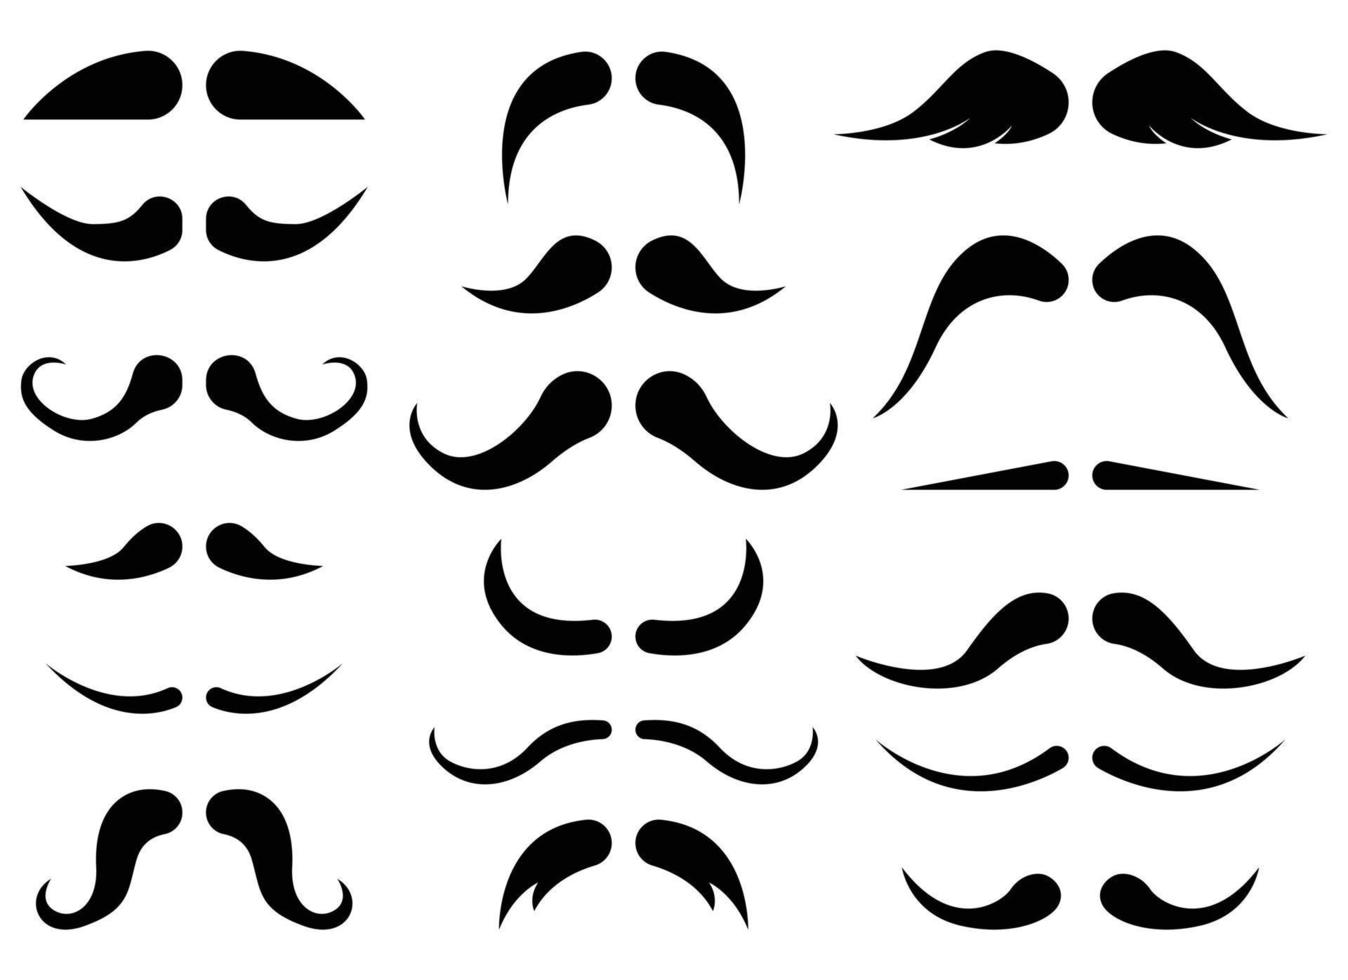 Black mustache collection vector illustration isolated on white